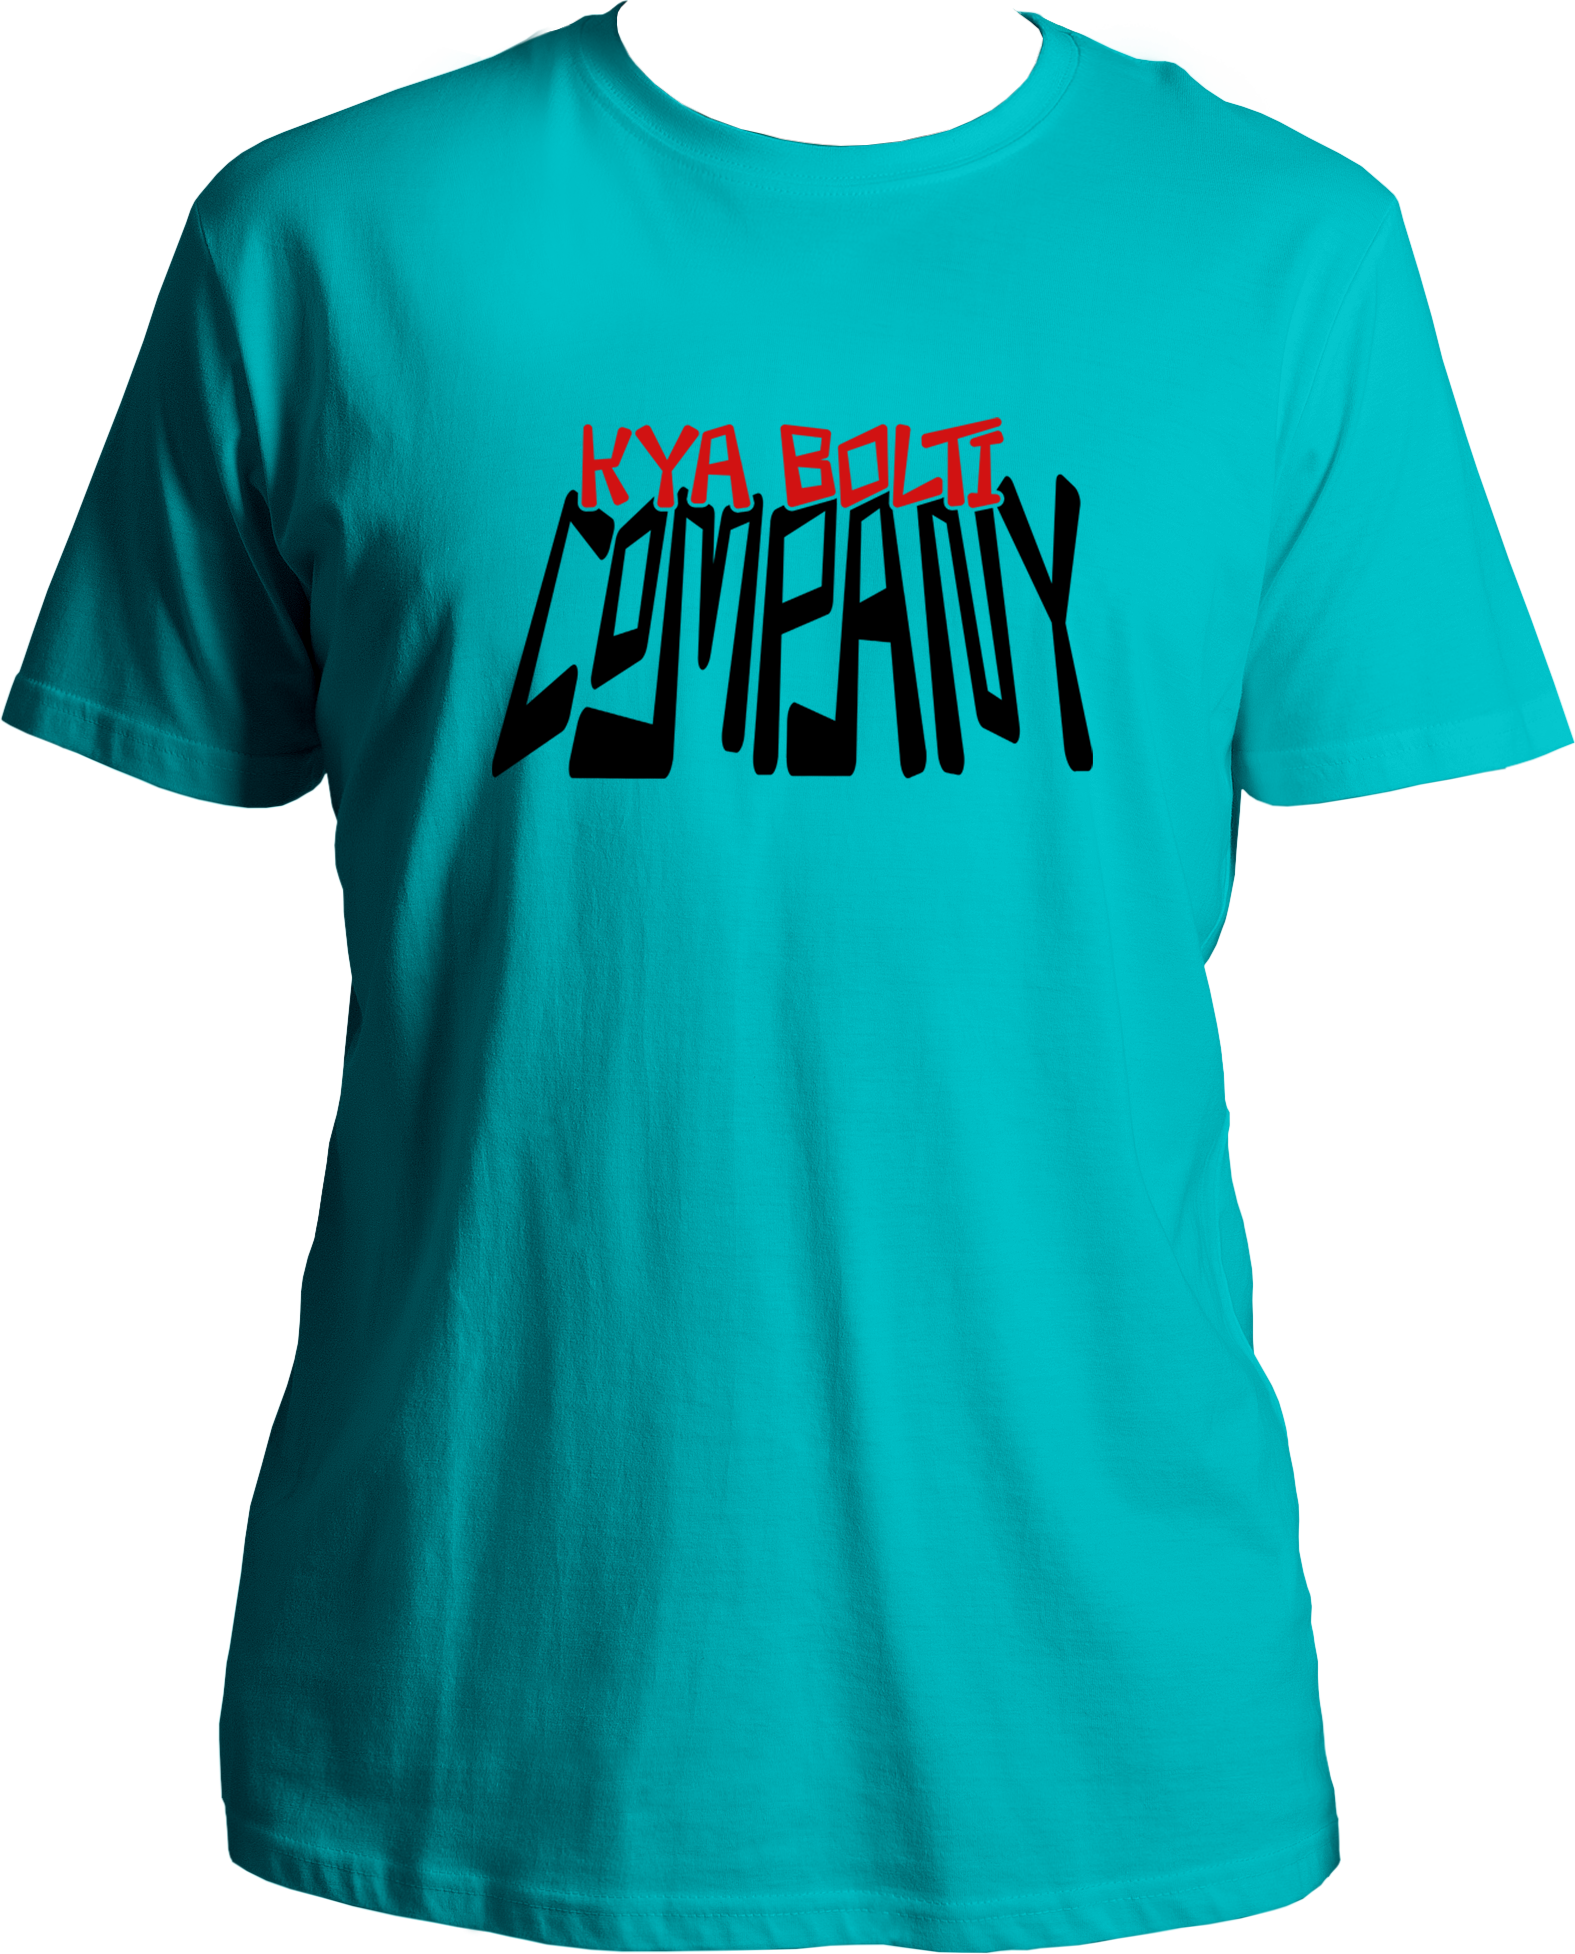 Kya Bolti Compnay, Emiway's latest hit songs's t-shirt for all you fans out there.